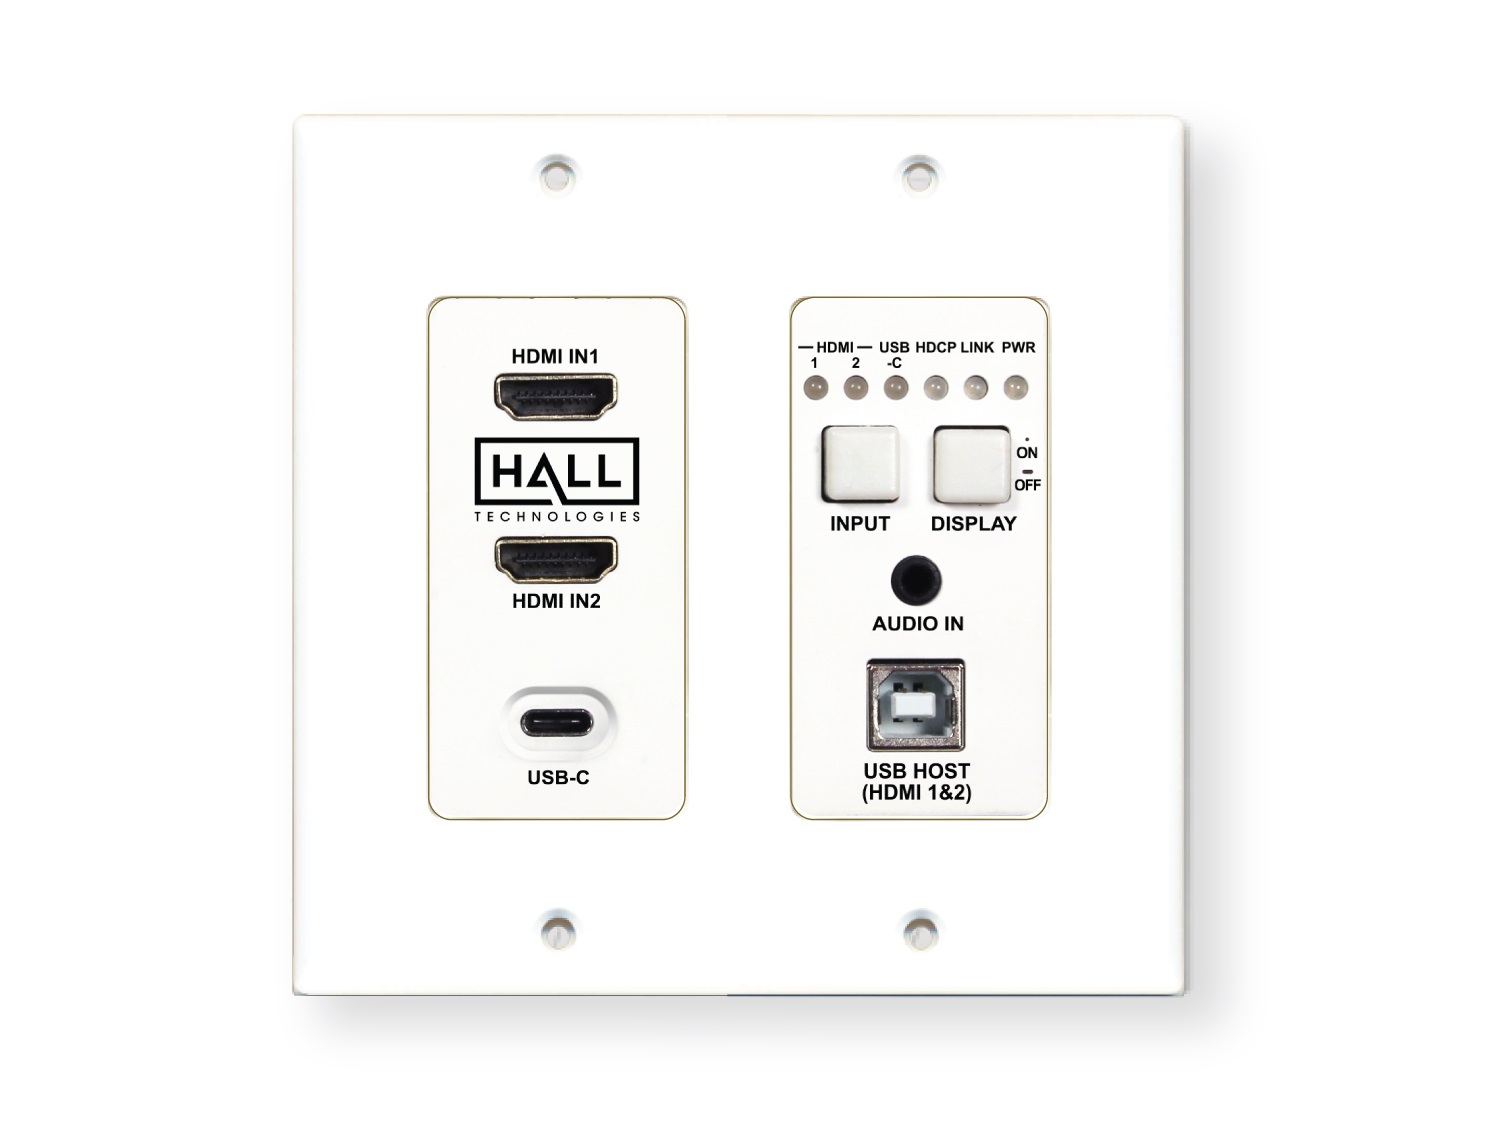 Hall Technologies HT-DSCV2-70-TX-US 4K UHD In-Wall Transmitter with USB Host and CEC Triggering